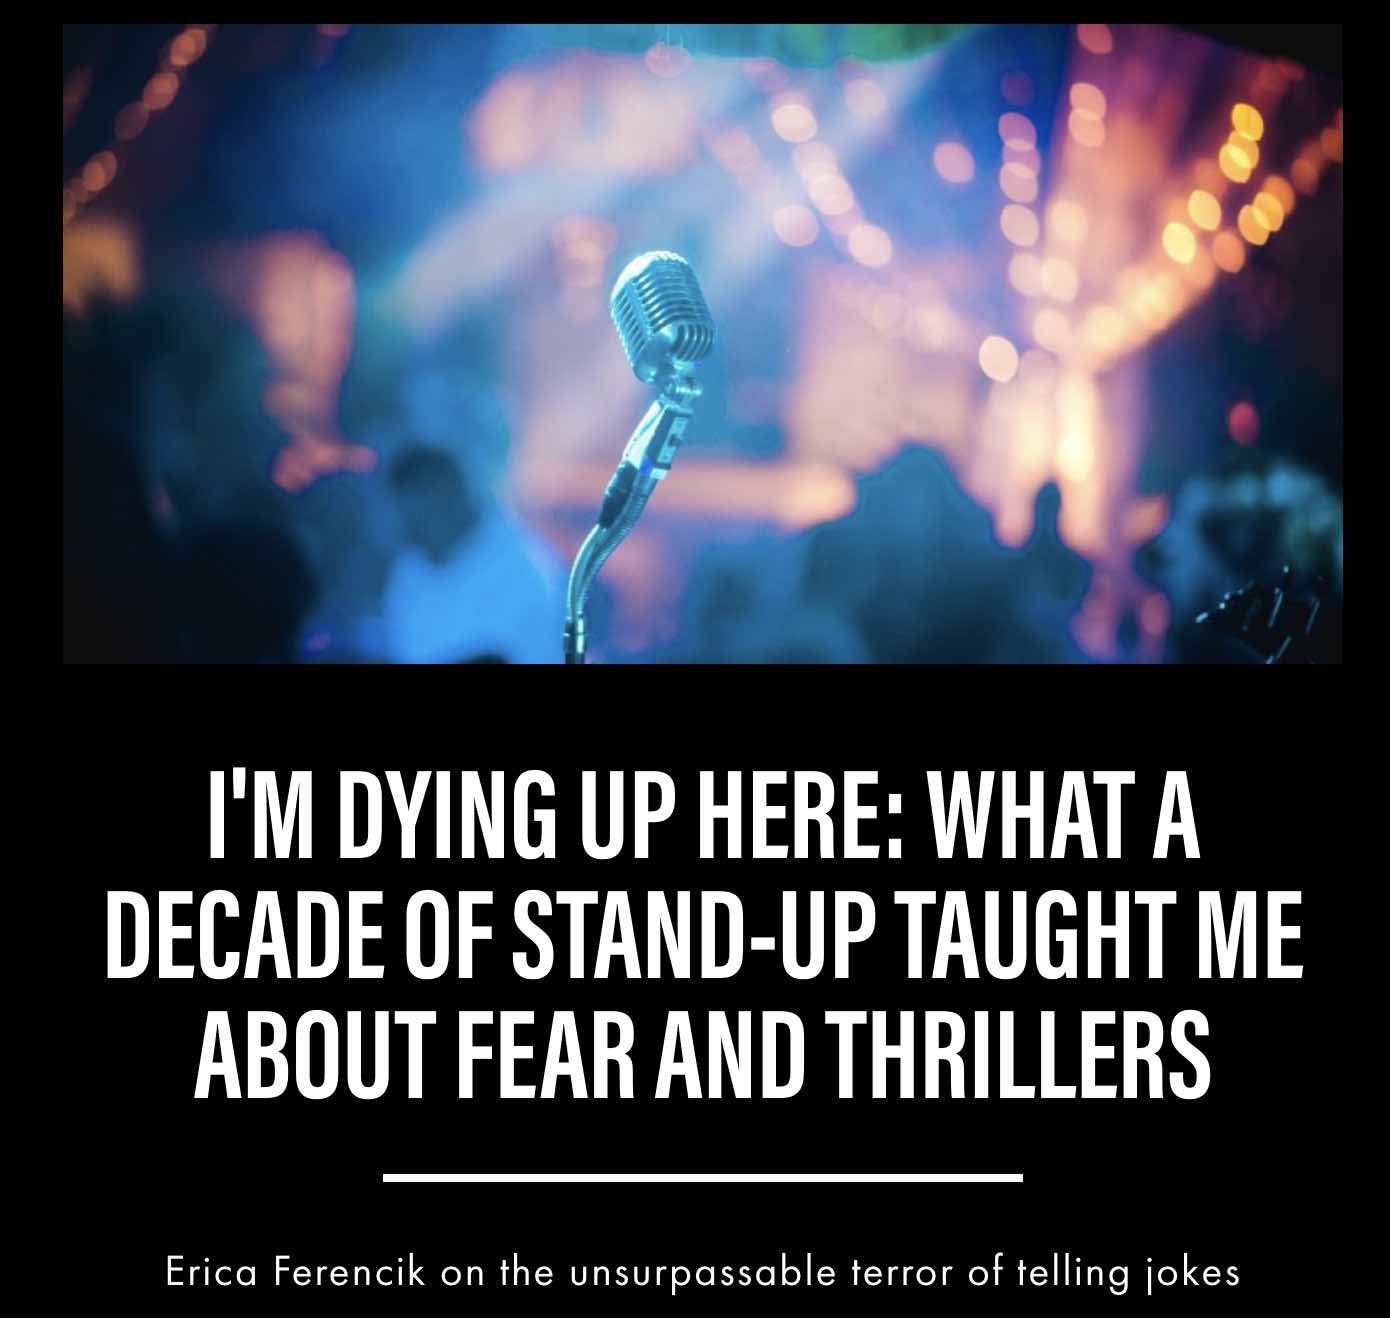 Featured image for “NOVELIST ERICA FERENCIK ON HER LIFE AS A STAND-UP”